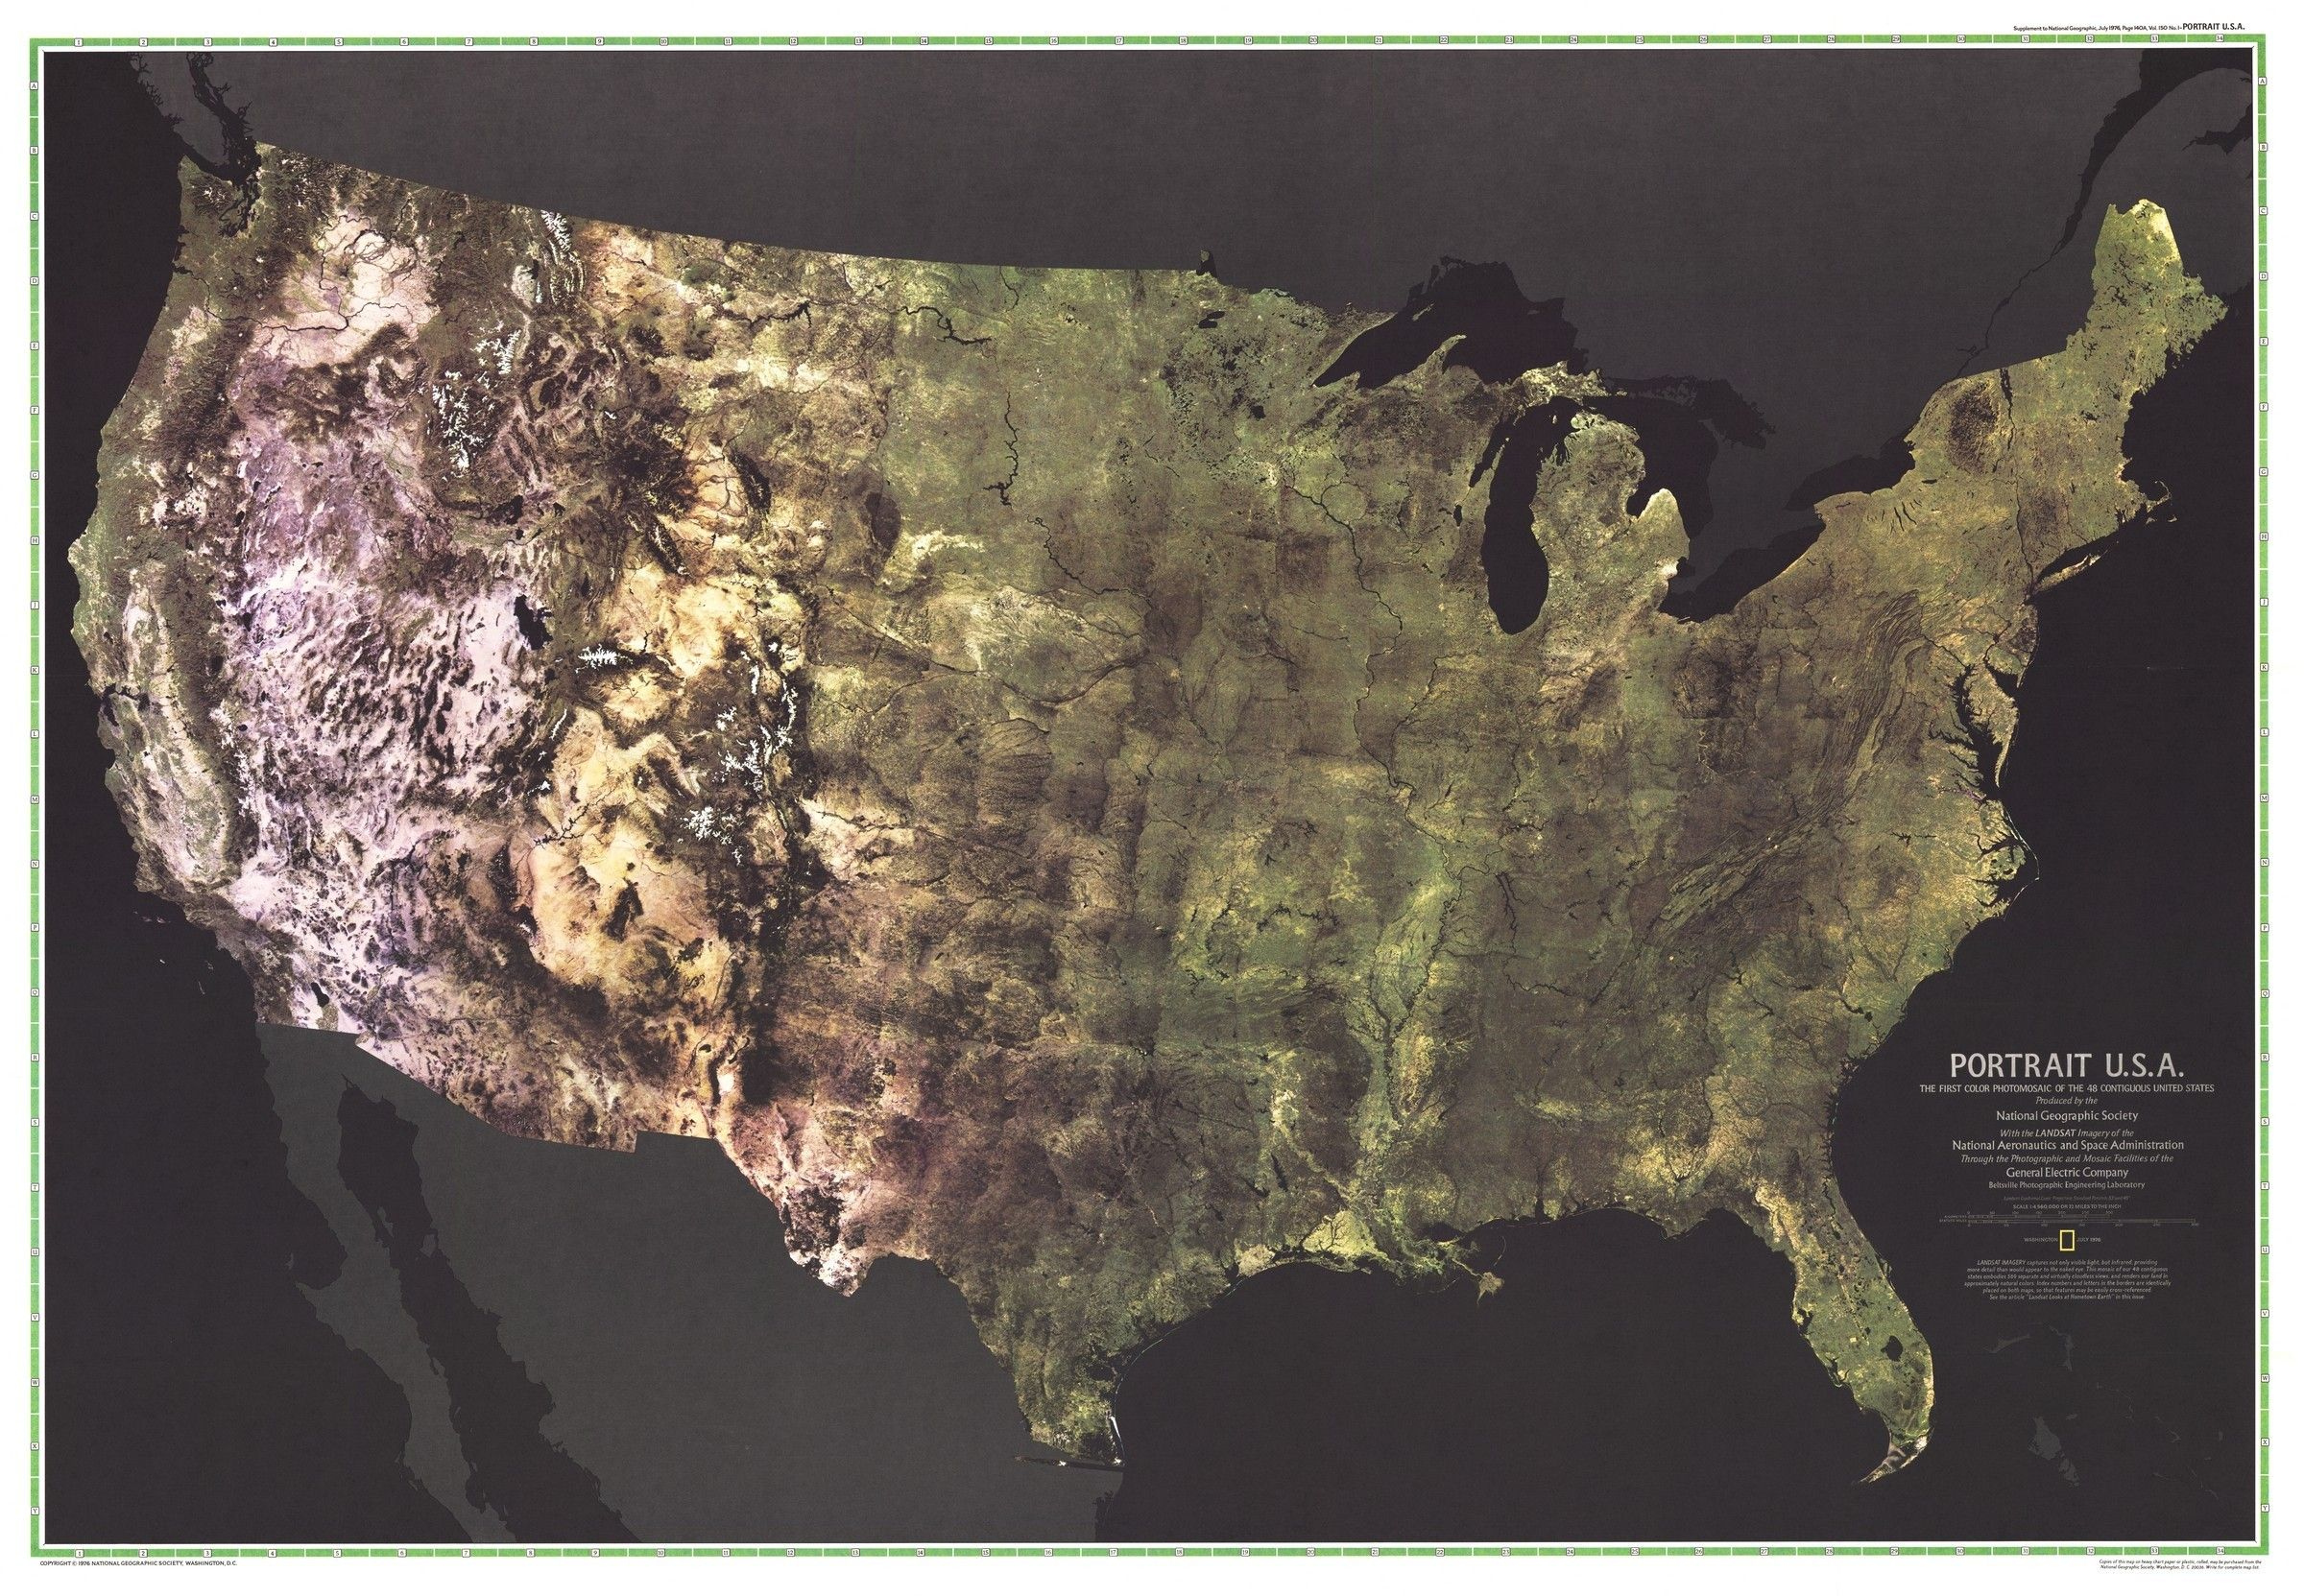 USA Portrait Map 1976 National Geographic Archives Imagery National 